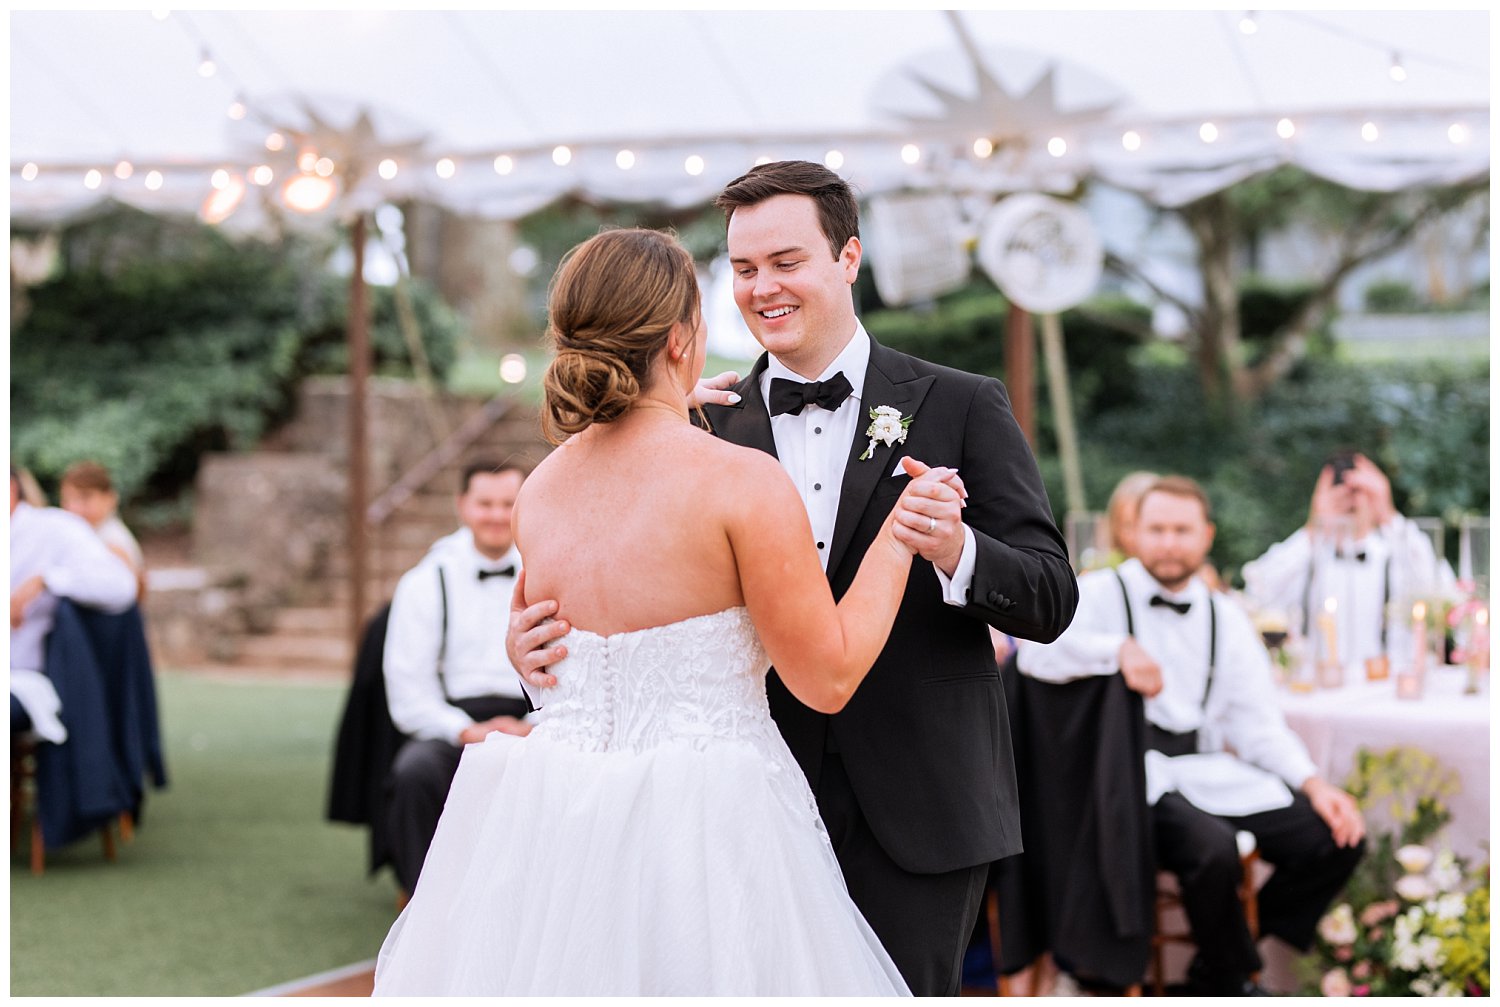 Bride and groom first dance at their colorful summer wedding in Charlottesville, Virginia